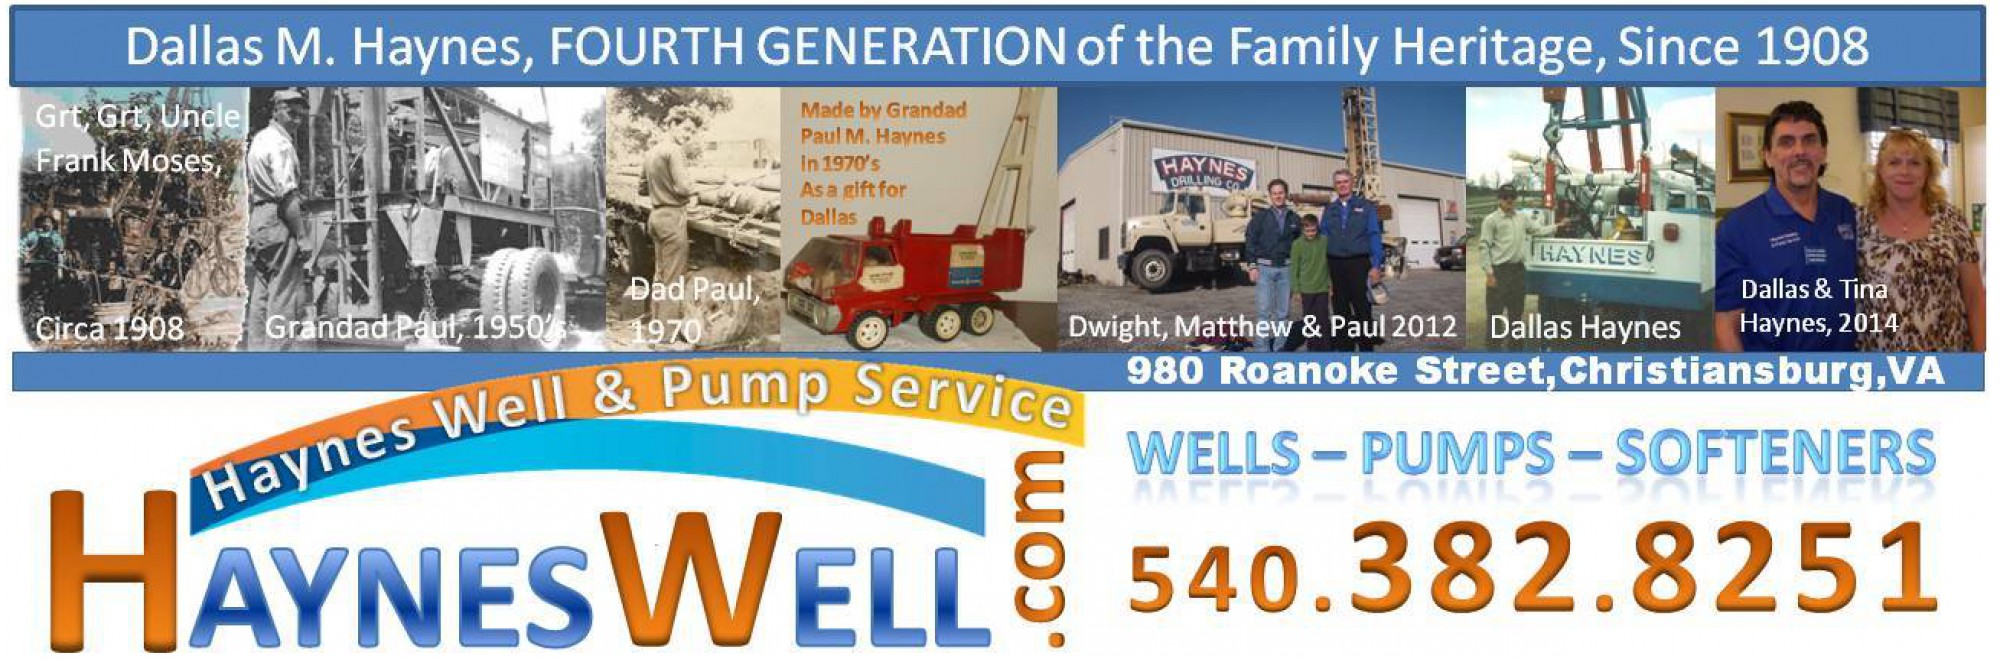 HAYNES WELL and PUMP SERVICE, Call 24/7 for Prompt, Reliable Service!